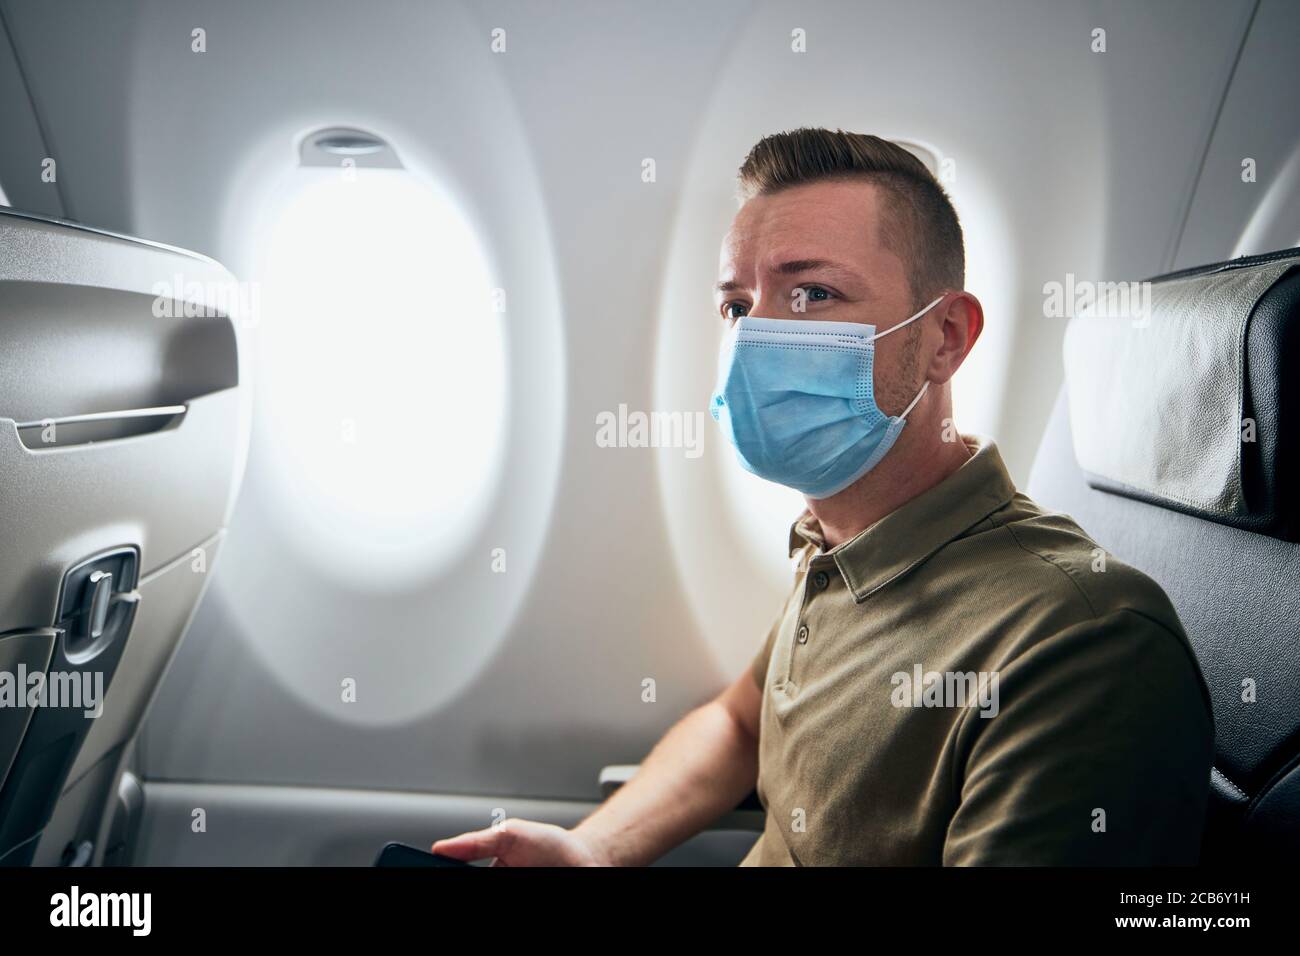 Man wearing face mask inside airplane during flight. Themes new normal, coronavirus and personal protection. Stock Photo